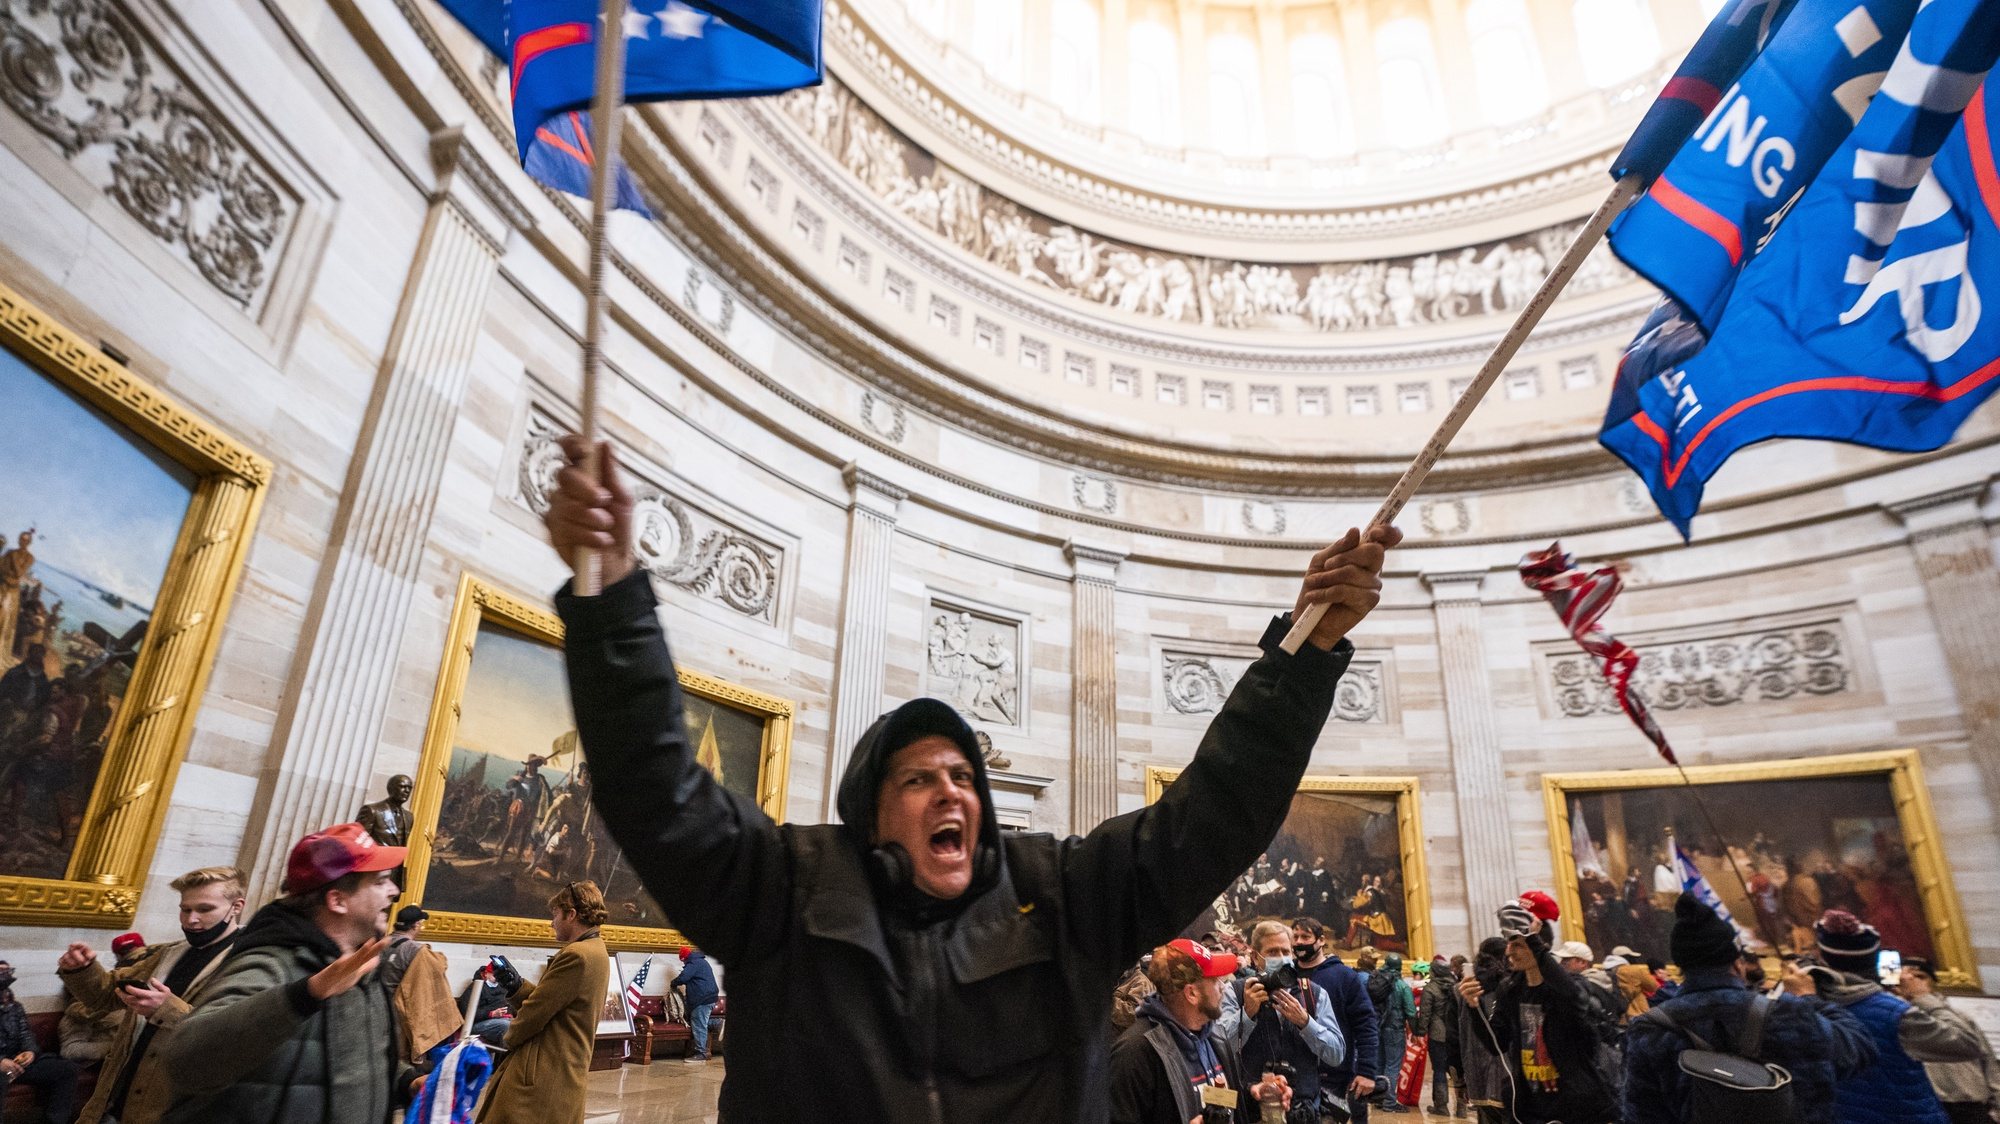 epa08923451 Supporters of US President Donald J. Trump in the Capitol Rotunda after breaching Capitol security in Washington, DC, USA, 06 January 2021. Protesters entered the US Capitol where the Electoral College vote certification for President-elect Joe Biden took place.  EPA/JIM LO SCALZO